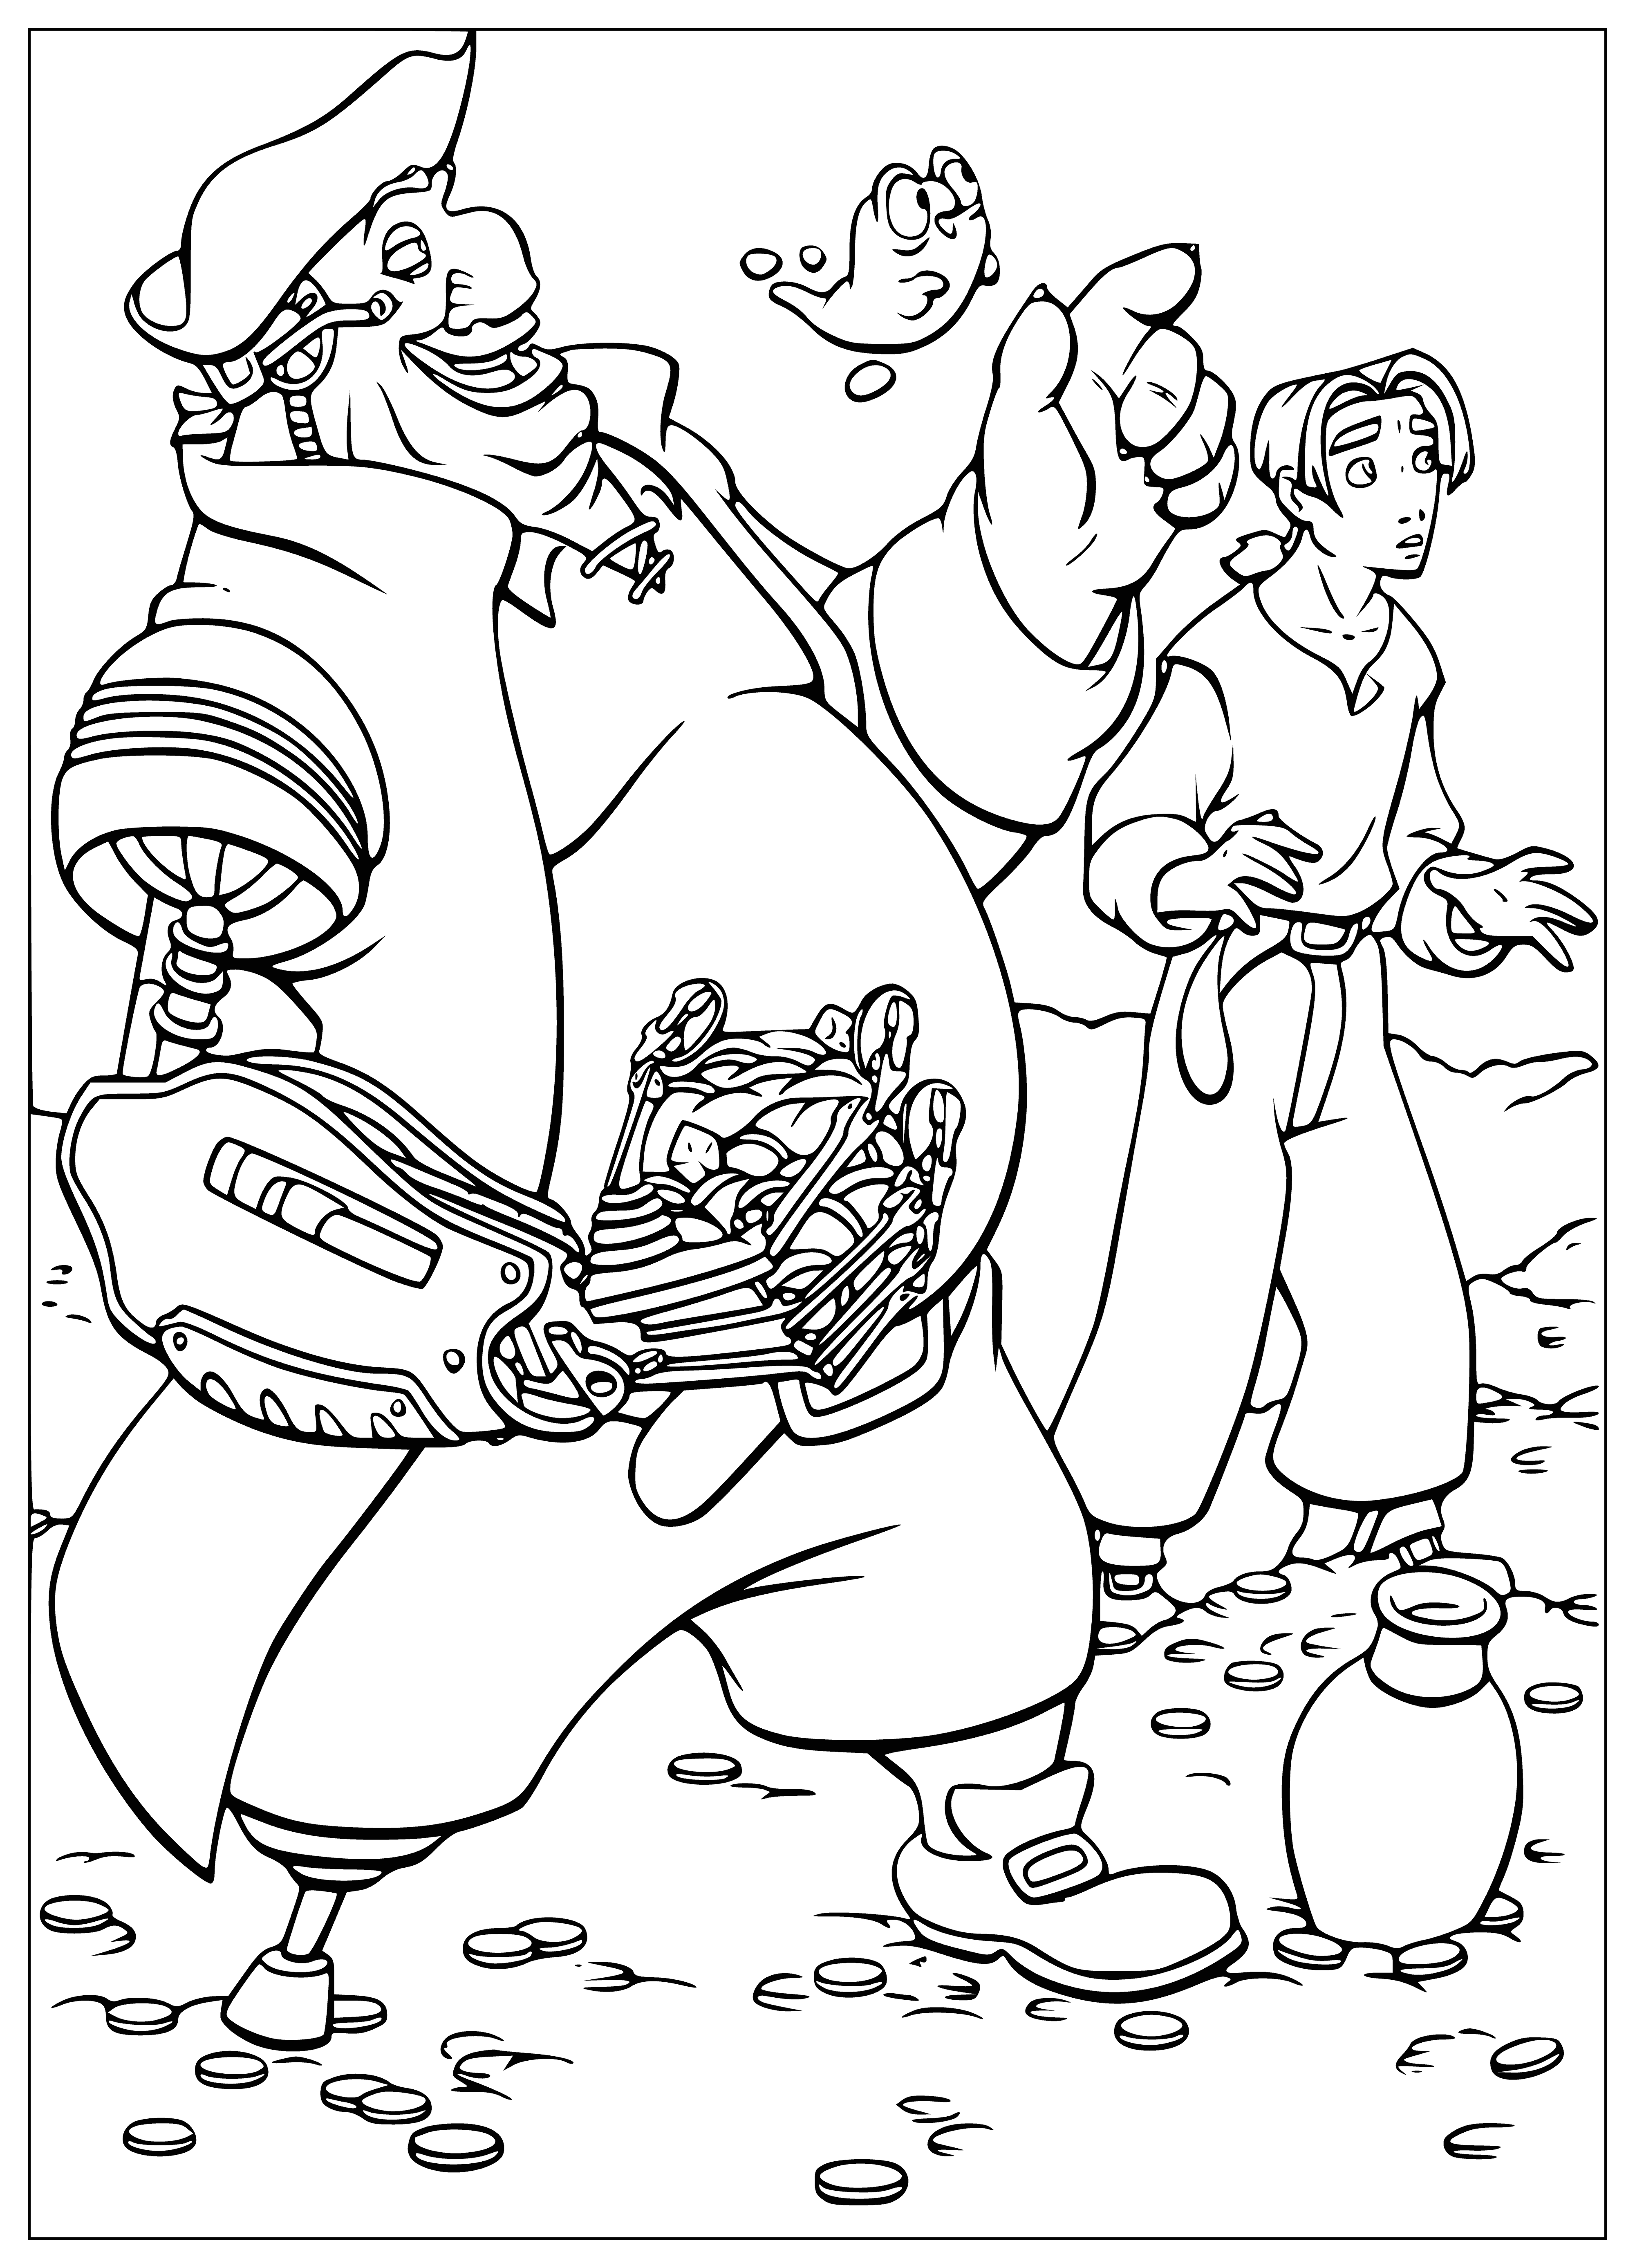 Gold and treasure coloring page